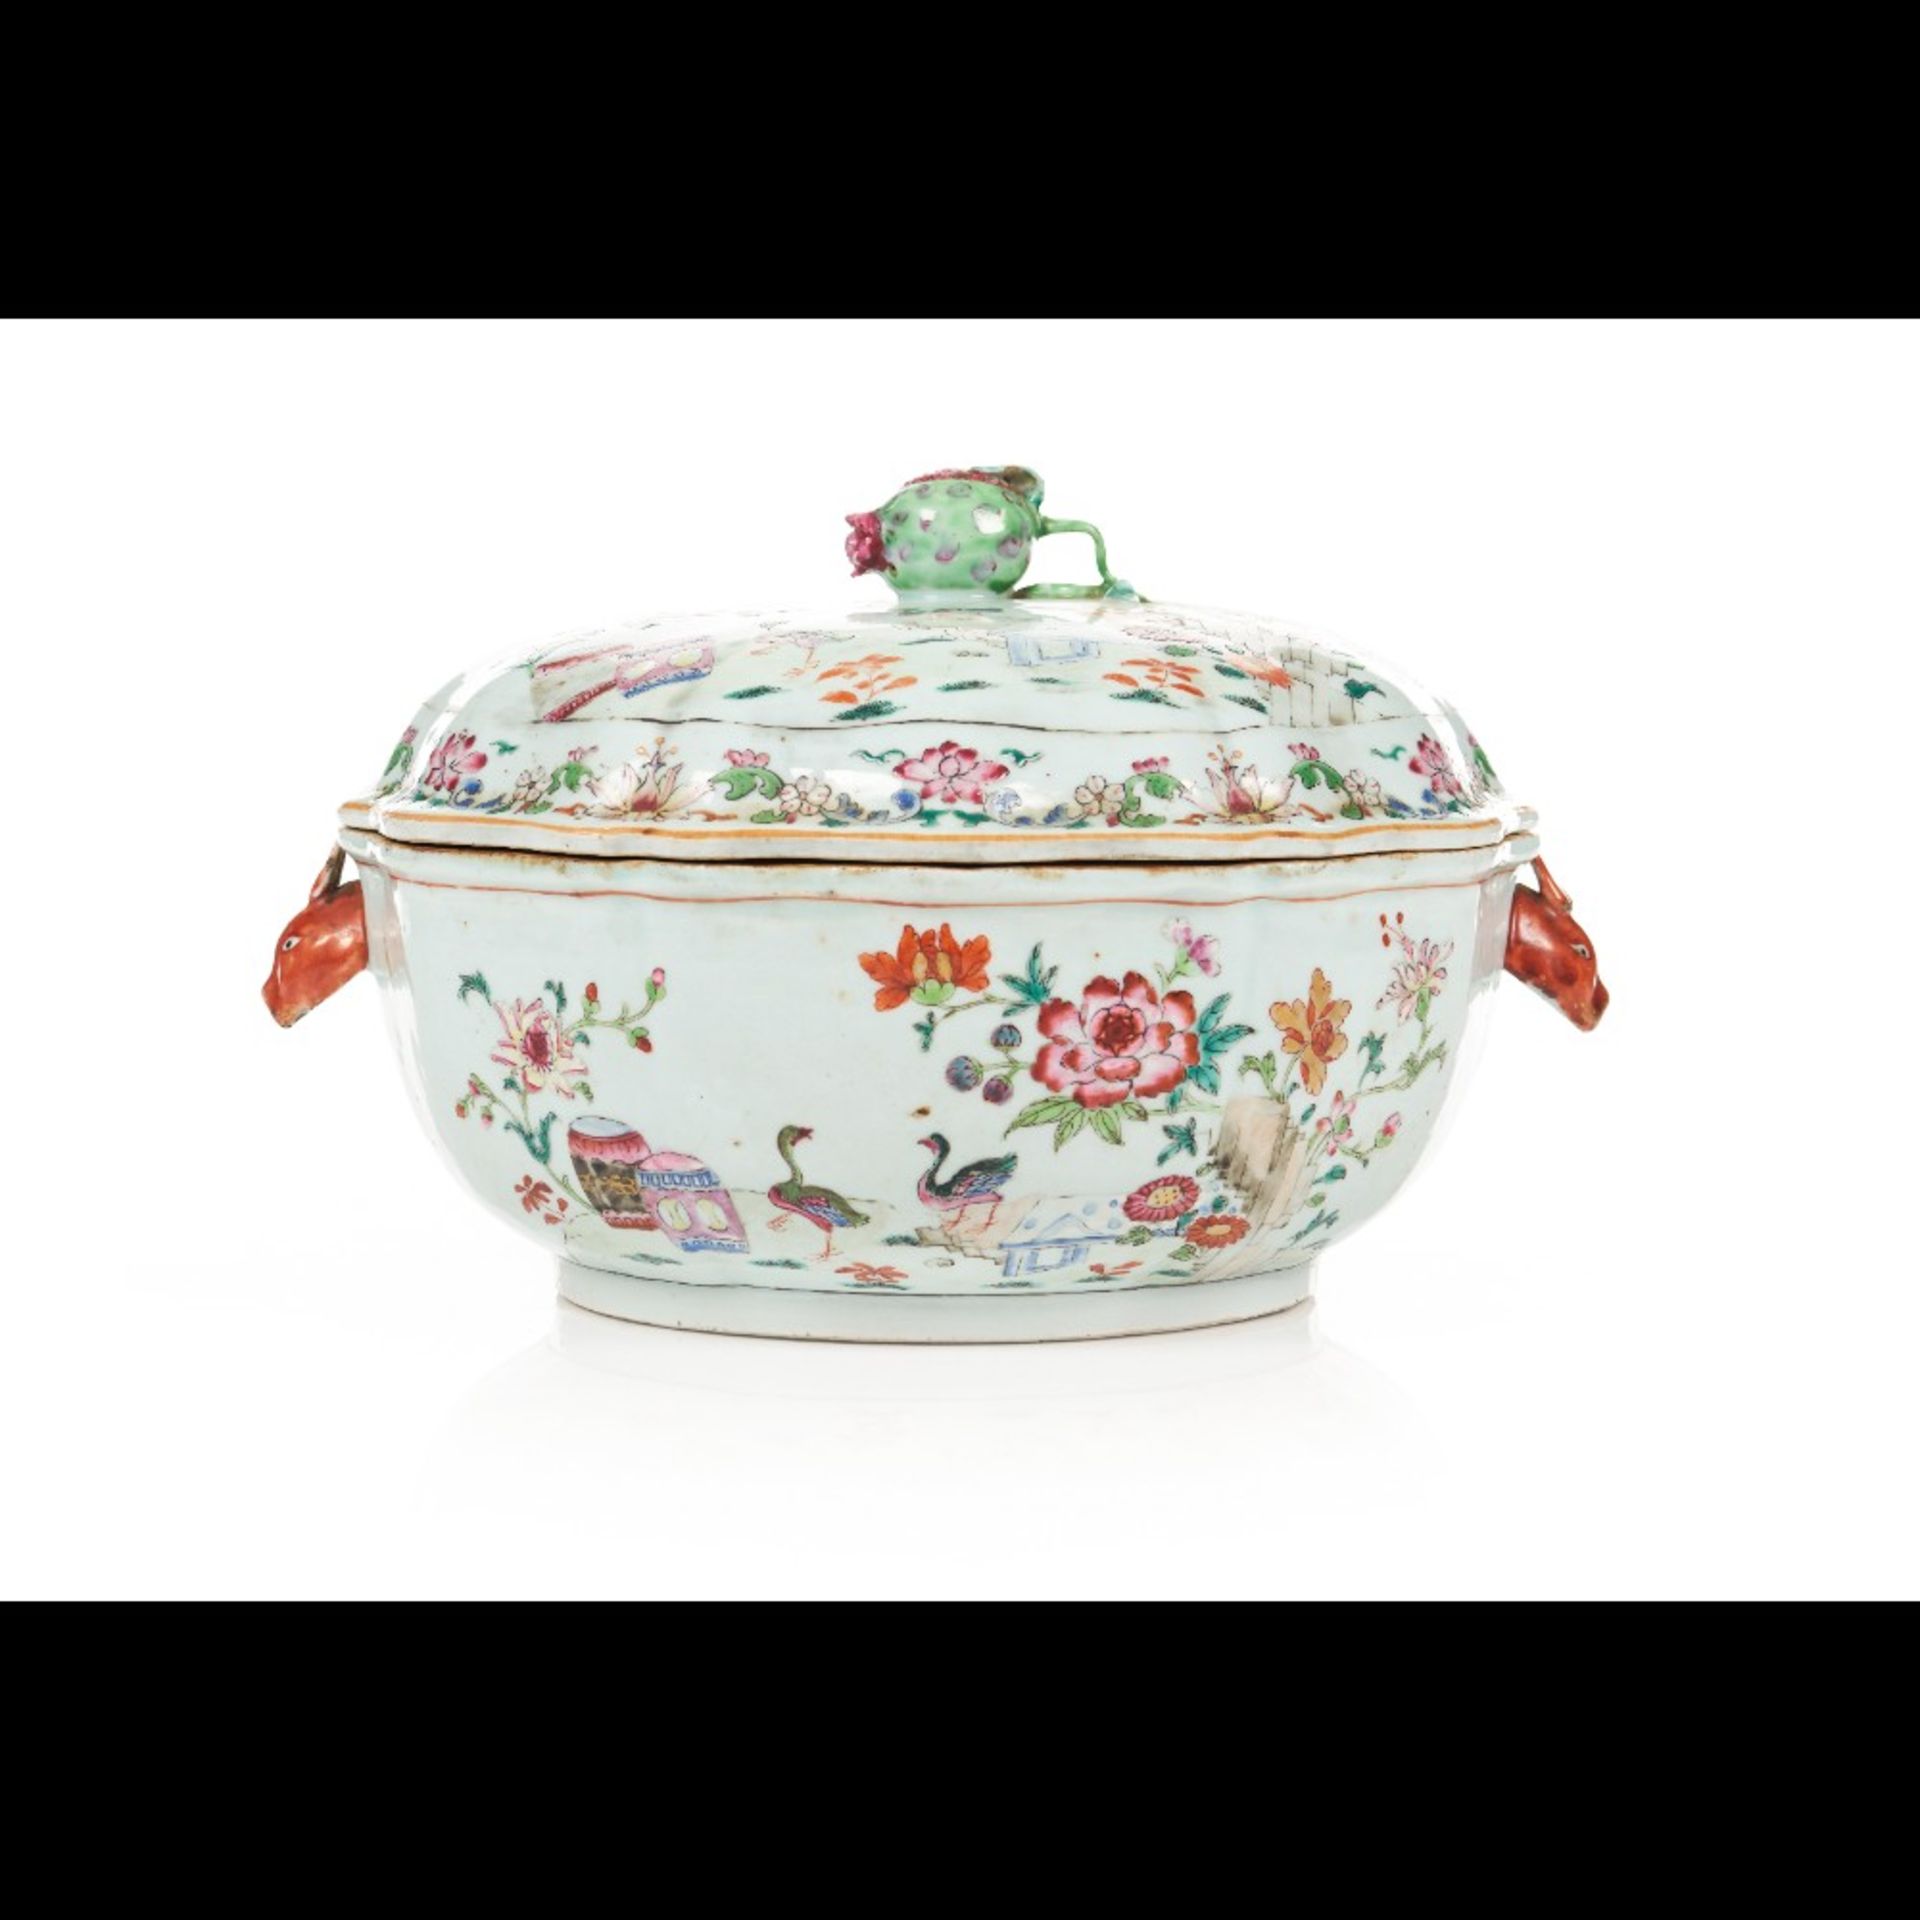  A round tureen and cover